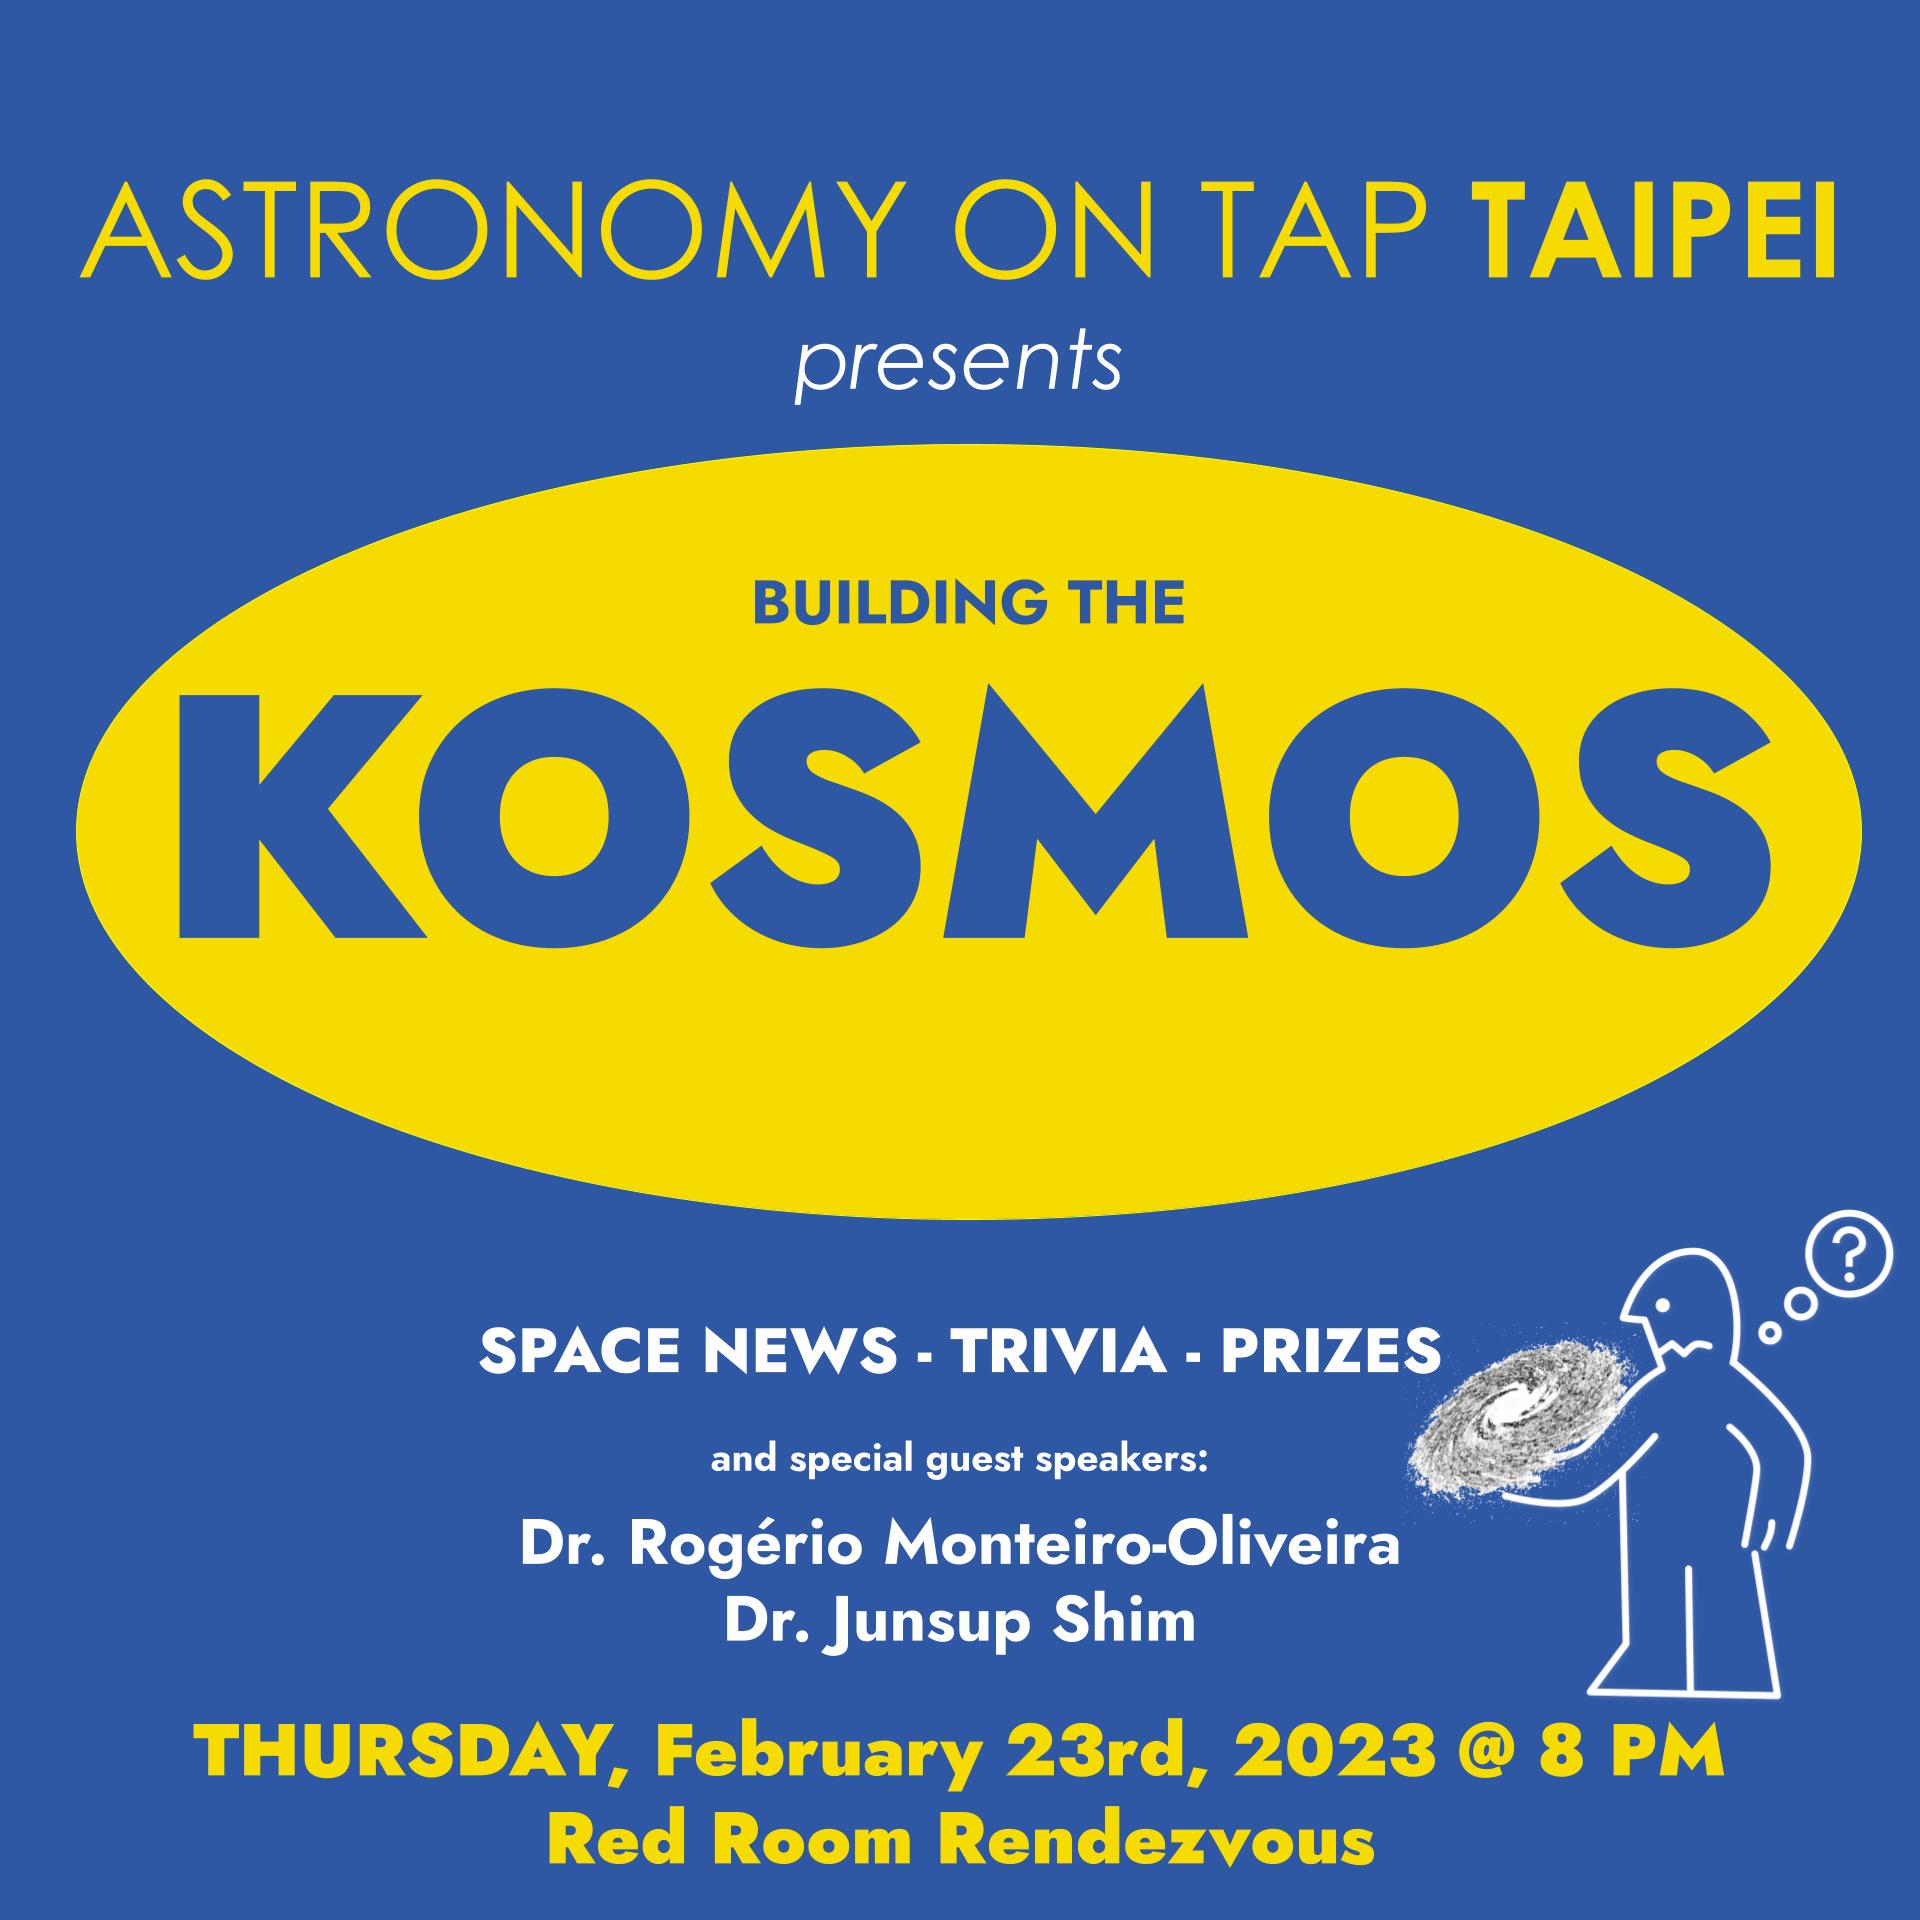 Astronomy on Tap Taipei presents "Building the Cosmos" 8pm Thursday 23rd February 2023 at Red Room Rendezvous